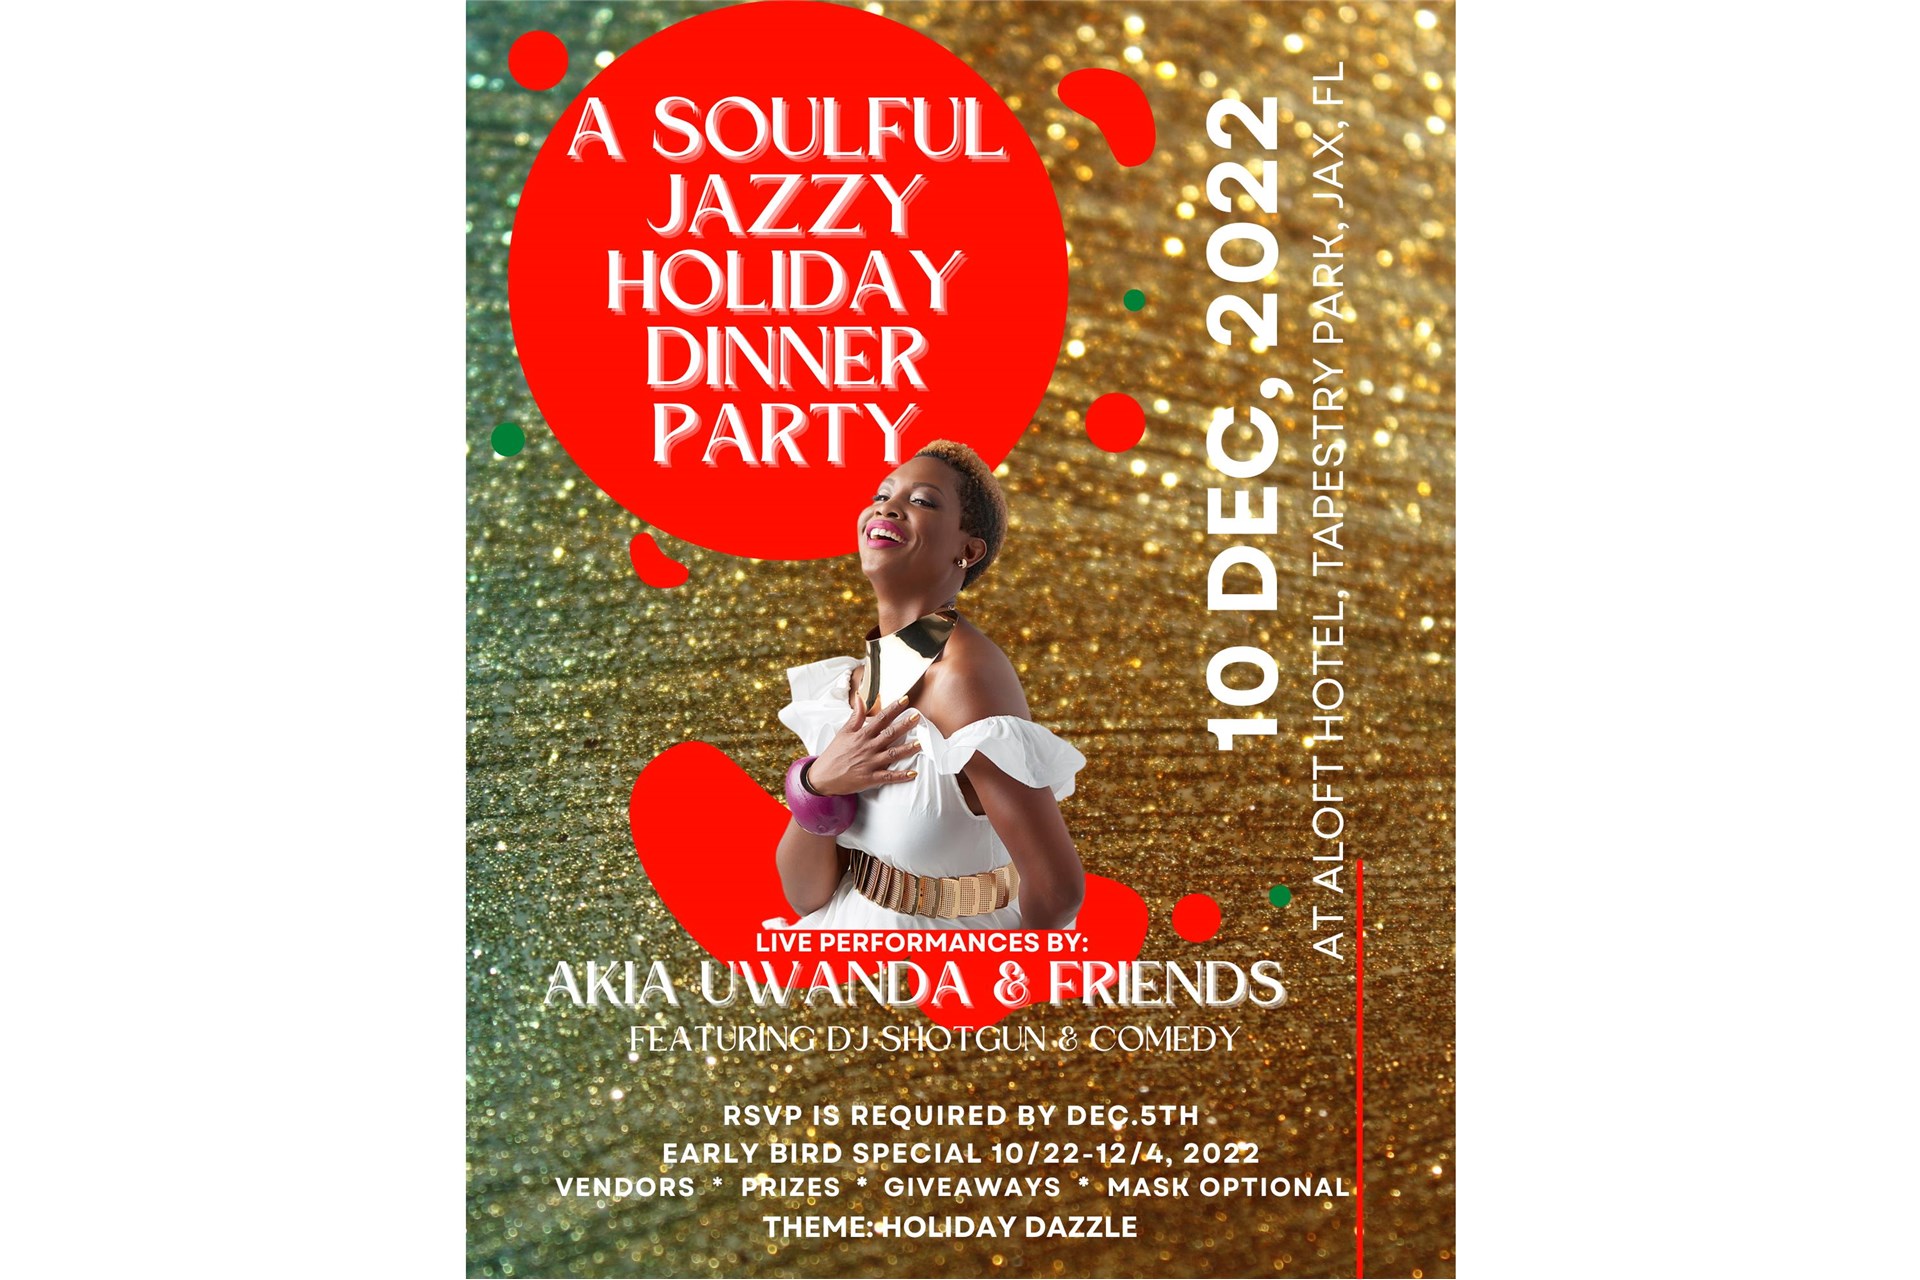 A Soulful Jazzy Holiday Dinner Party